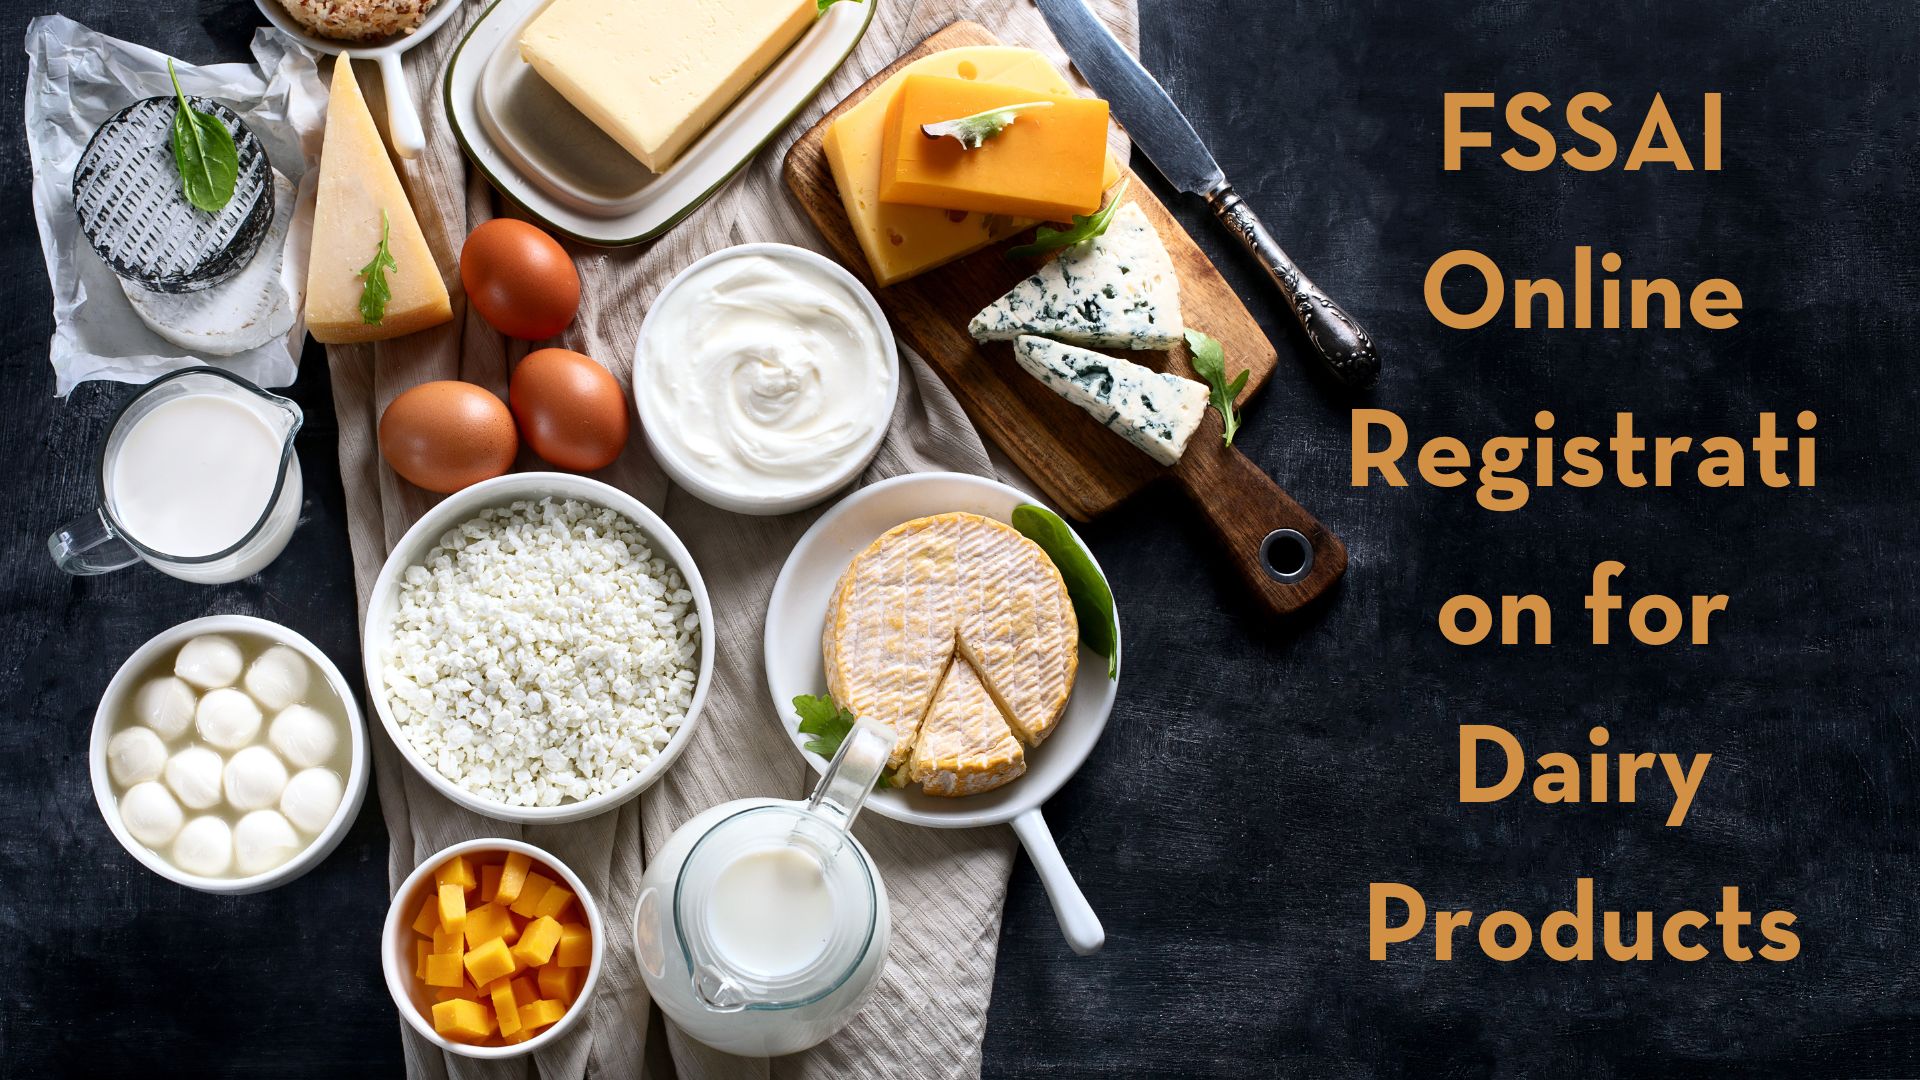 FSSAI Online Registration for Dairy Products